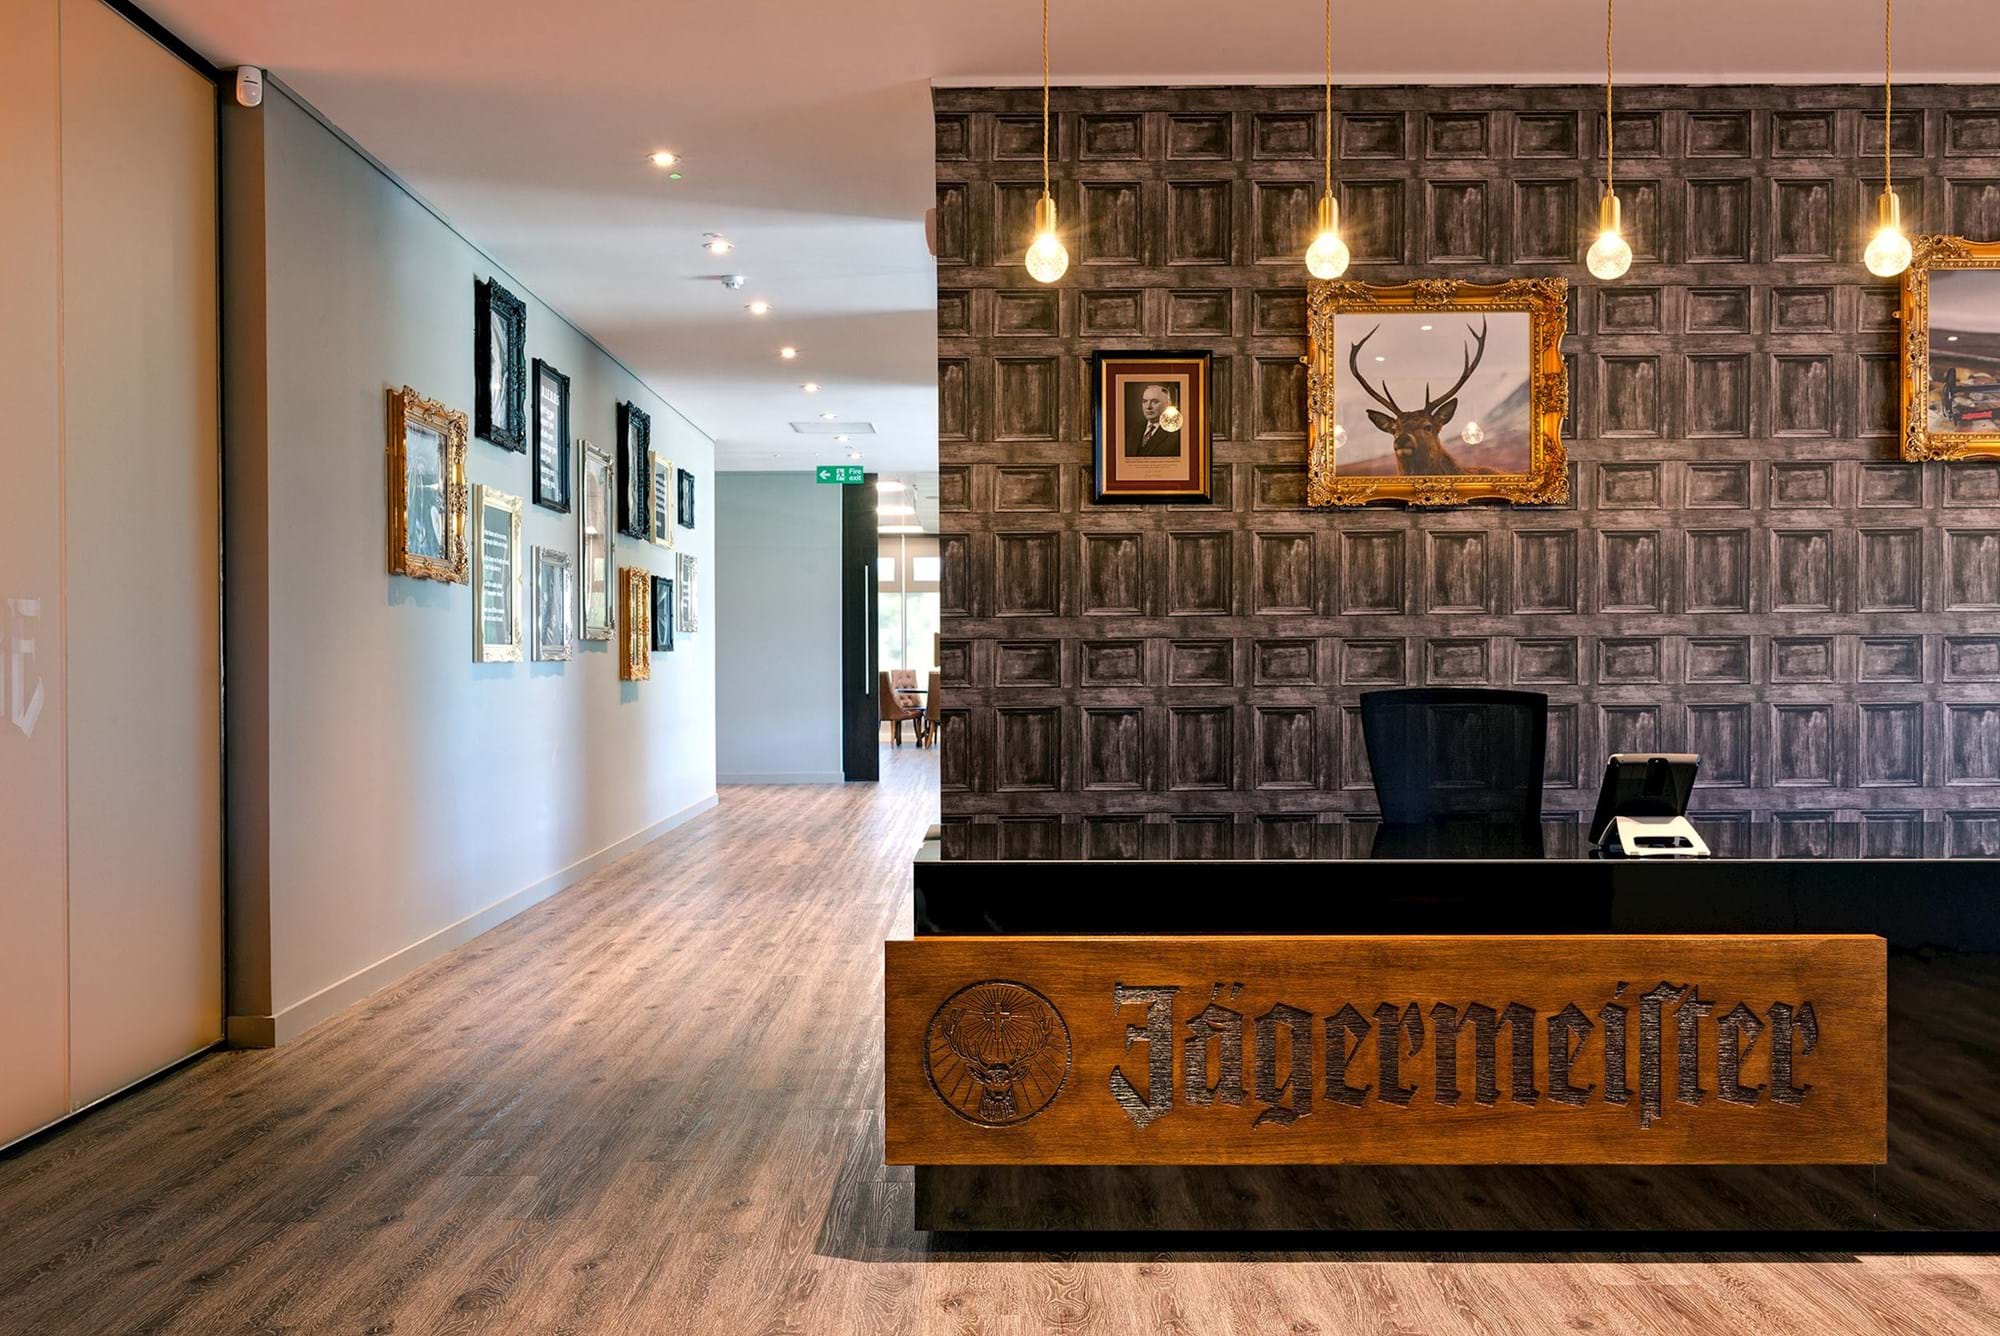 Modus Workspace office design, fit out and refurbishment - Jagermeister - Reception - Jagermeister 02 d highres sRGB.jpg